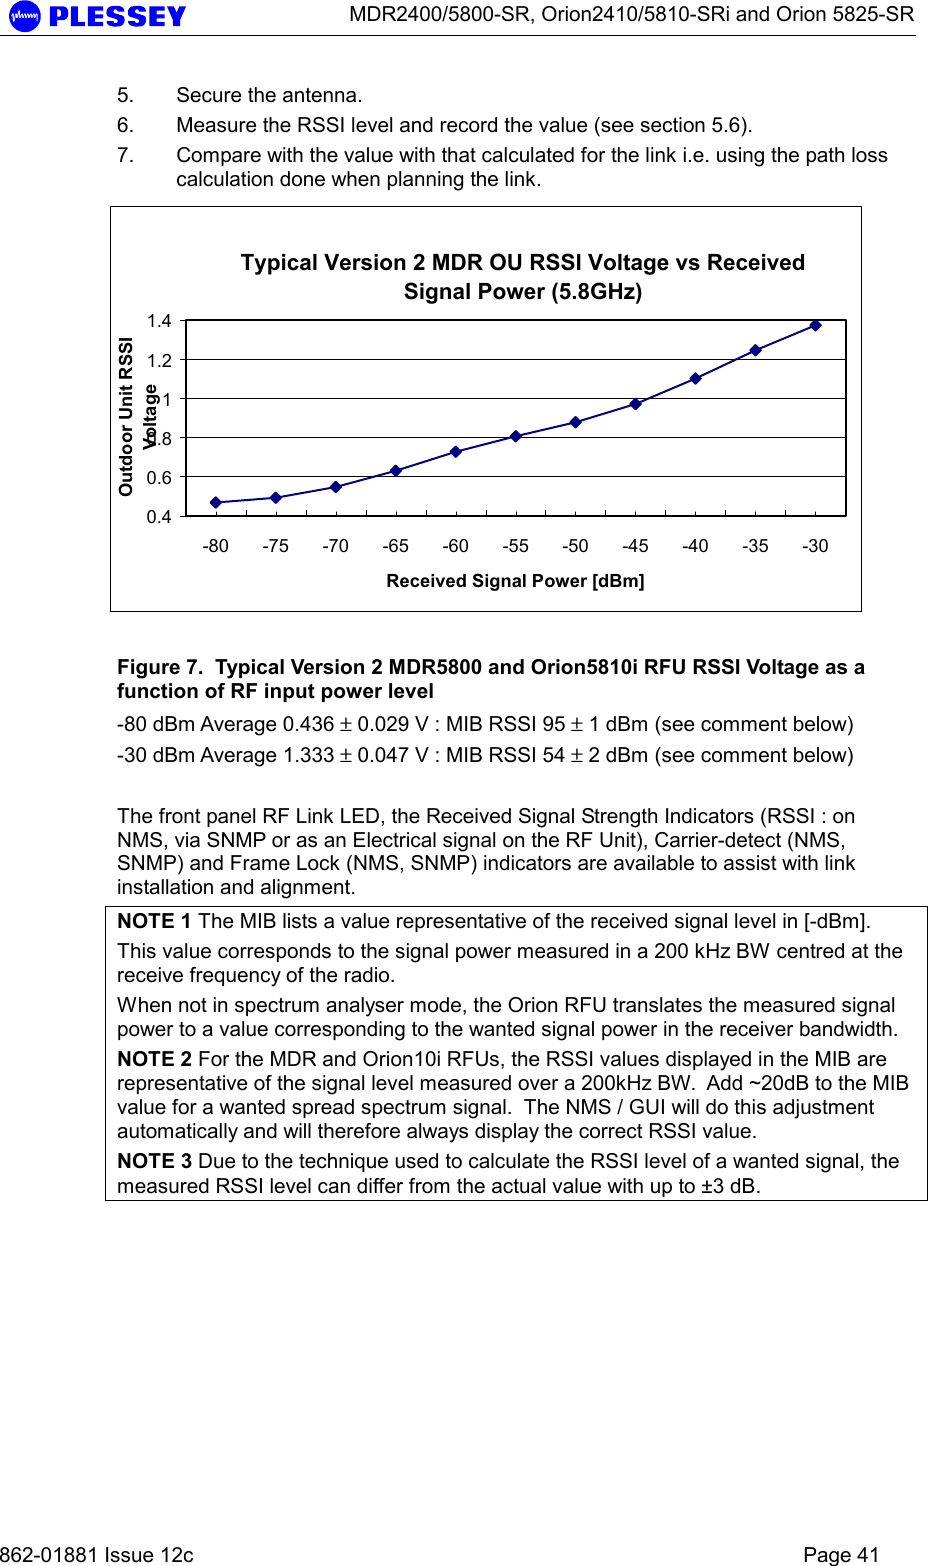      MDR2400/5800-SR, Orion2410/5810-SRi and Orion 5825-SR   862-01881 Issue 12c    Page 41 5.  Secure the antenna. 6.  Measure the RSSI level and record the value (see section 5.6). 7.  Compare with the value with that calculated for the link i.e. using the path loss calculation done when planning the link. Typical Version 2 MDR OU RSSI Voltage vs Received Signal Power (5.8GHz)0.40.60.811.21.4-80 -75 -70 -65 -60 -55 -50 -45 -40 -35 -30Received Signal Power [dBm]Outdoor Unit RSSI Voltage  Figure 7.  Typical Version 2 MDR5800 and Orion5810i RFU RSSI Voltage as a function of RF input power level  -80 dBm Average 0.436 ± 0.029 V : MIB RSSI 95 ± 1 dBm (see comment below) -30 dBm Average 1.333 ± 0.047 V : MIB RSSI 54 ± 2 dBm (see comment below)  The front panel RF Link LED, the Received Signal Strength Indicators (RSSI : on NMS, via SNMP or as an Electrical signal on the RF Unit), Carrier-detect (NMS, SNMP) and Frame Lock (NMS, SNMP) indicators are available to assist with link installation and alignment.  NOTE 1 The MIB lists a value representative of the received signal level in [-dBm].   This value corresponds to the signal power measured in a 200 kHz BW centred at the receive frequency of the radio. When not in spectrum analyser mode, the Orion RFU translates the measured signal power to a value corresponding to the wanted signal power in the receiver bandwidth.  NOTE 2 For the MDR and Orion10i RFUs, the RSSI values displayed in the MIB are representative of the signal level measured over a 200kHz BW.  Add ~20dB to the MIB value for a wanted spread spectrum signal.  The NMS / GUI will do this adjustment automatically and will therefore always display the correct RSSI value. NOTE 3 Due to the technique used to calculate the RSSI level of a wanted signal, the measured RSSI level can differ from the actual value with up to ±3 dB.  